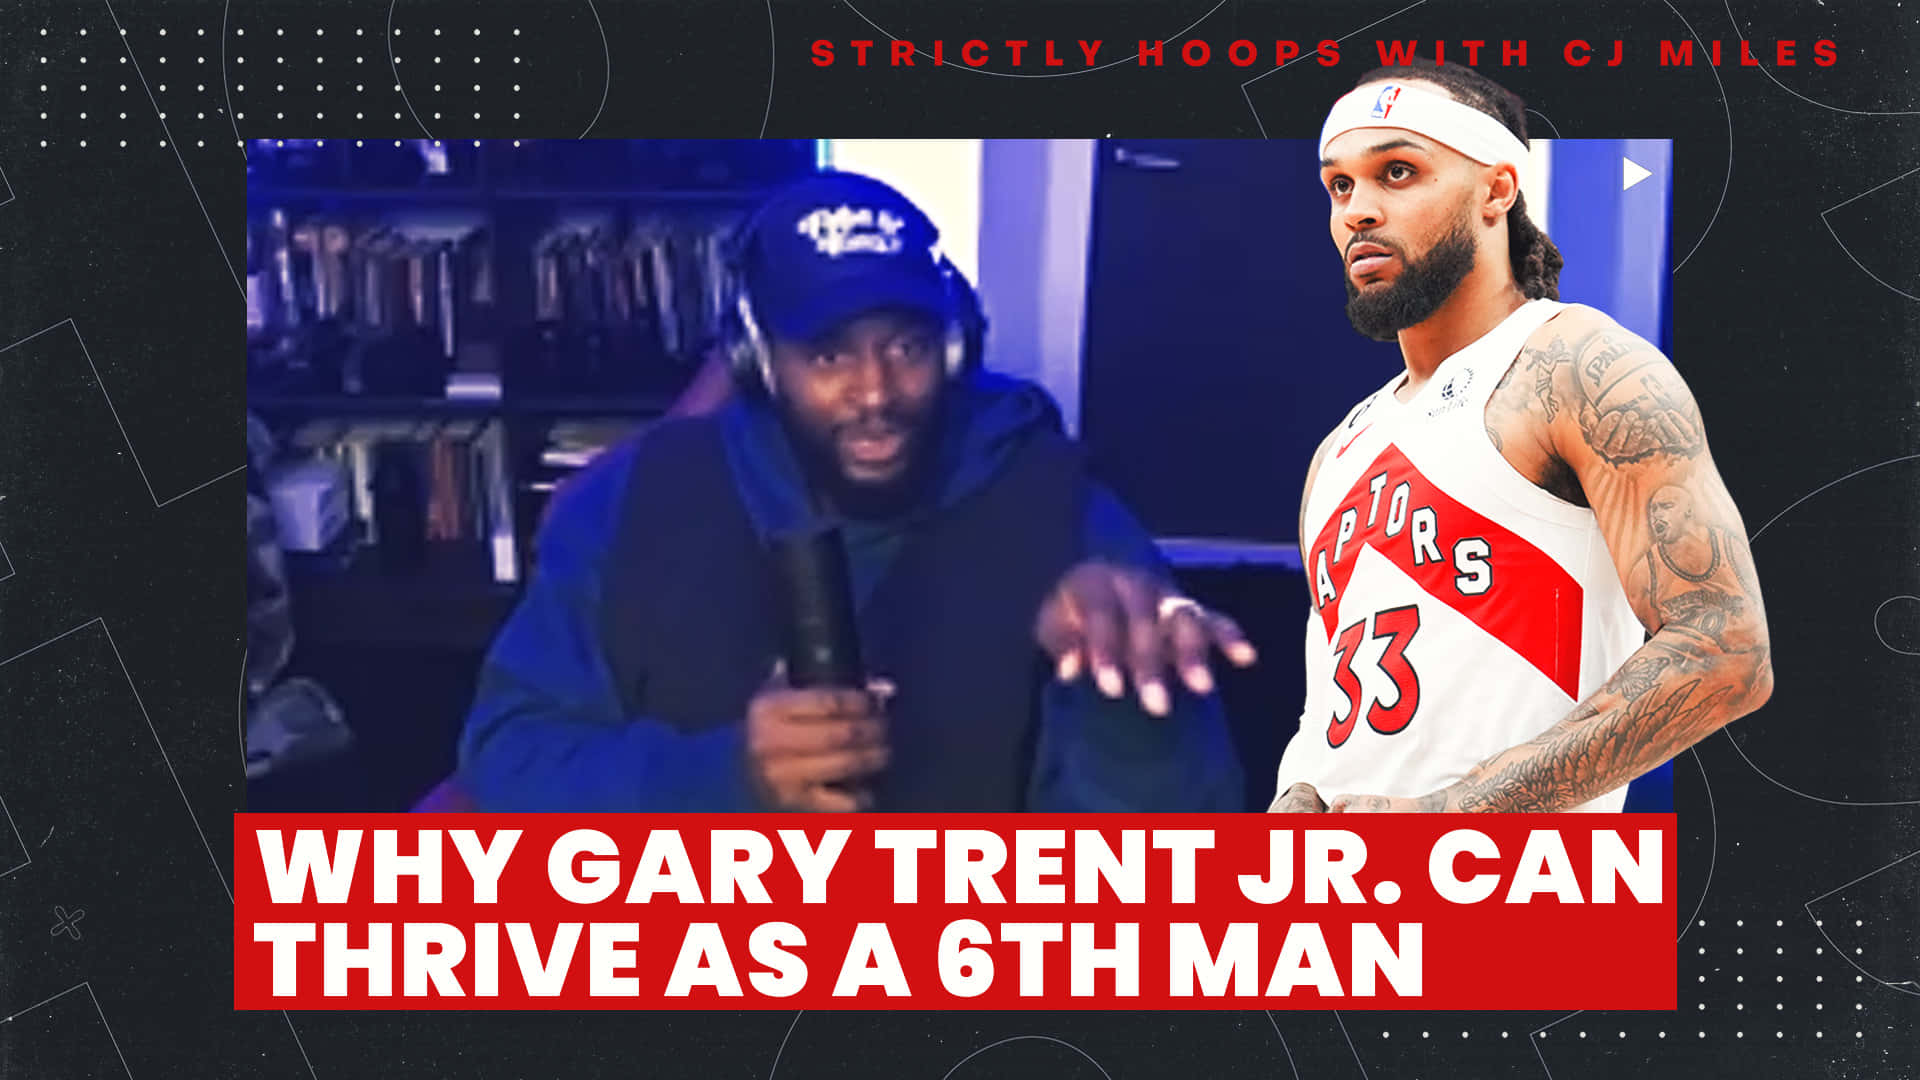 NBA Basketball Player Gary Trent Jr Strictly Hoops Podcast Wallpaper